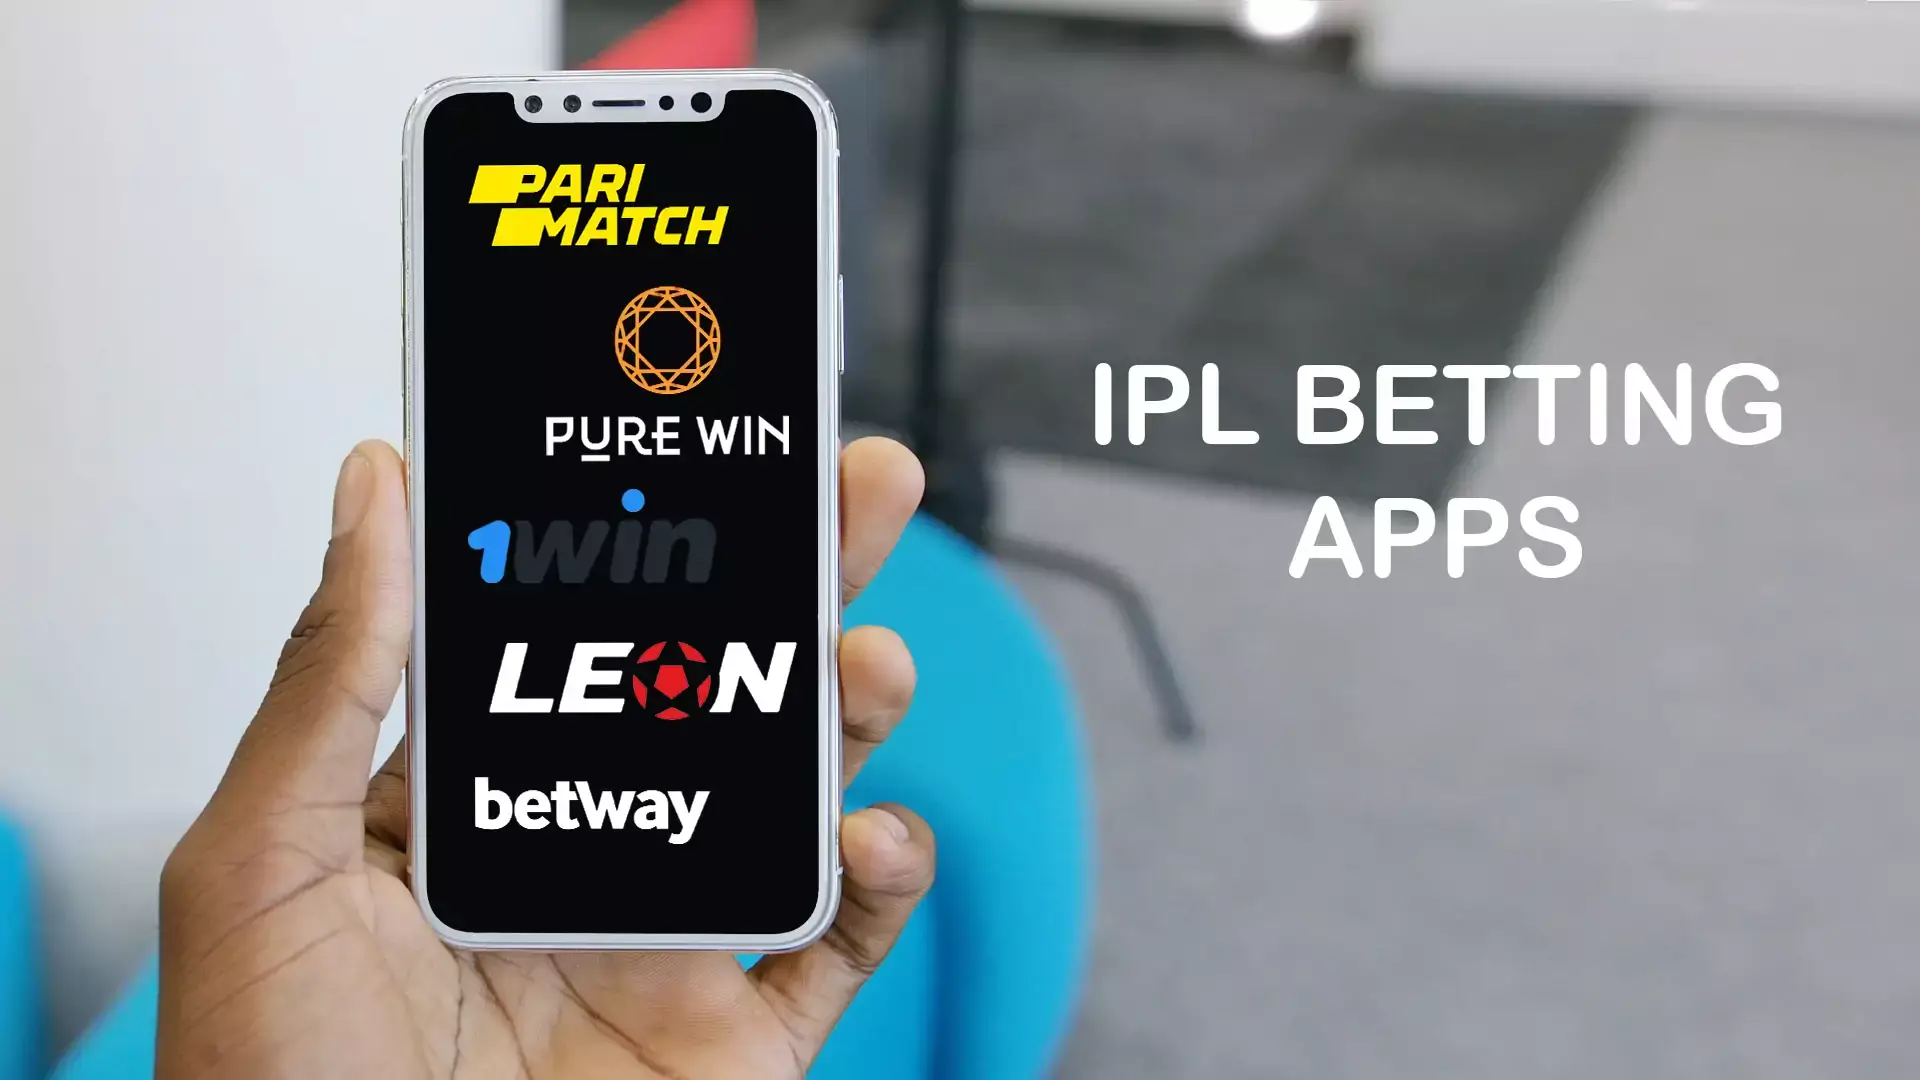 Are You Good At 1x Betting App Download? Here's A Quick Quiz To Find Out